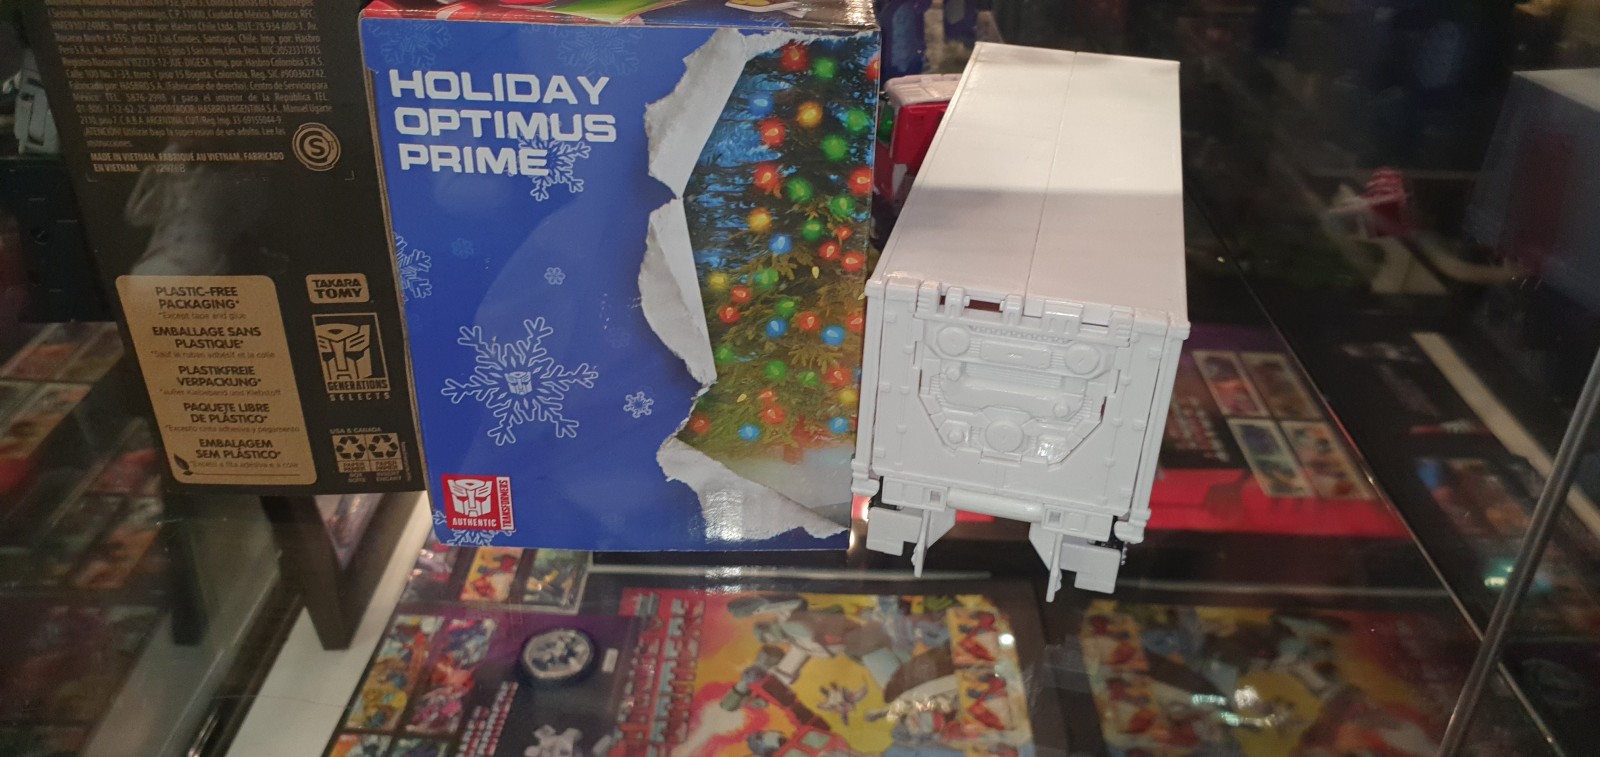 Transformers News: New Leader Class Holiday Optimus Prime Revealed